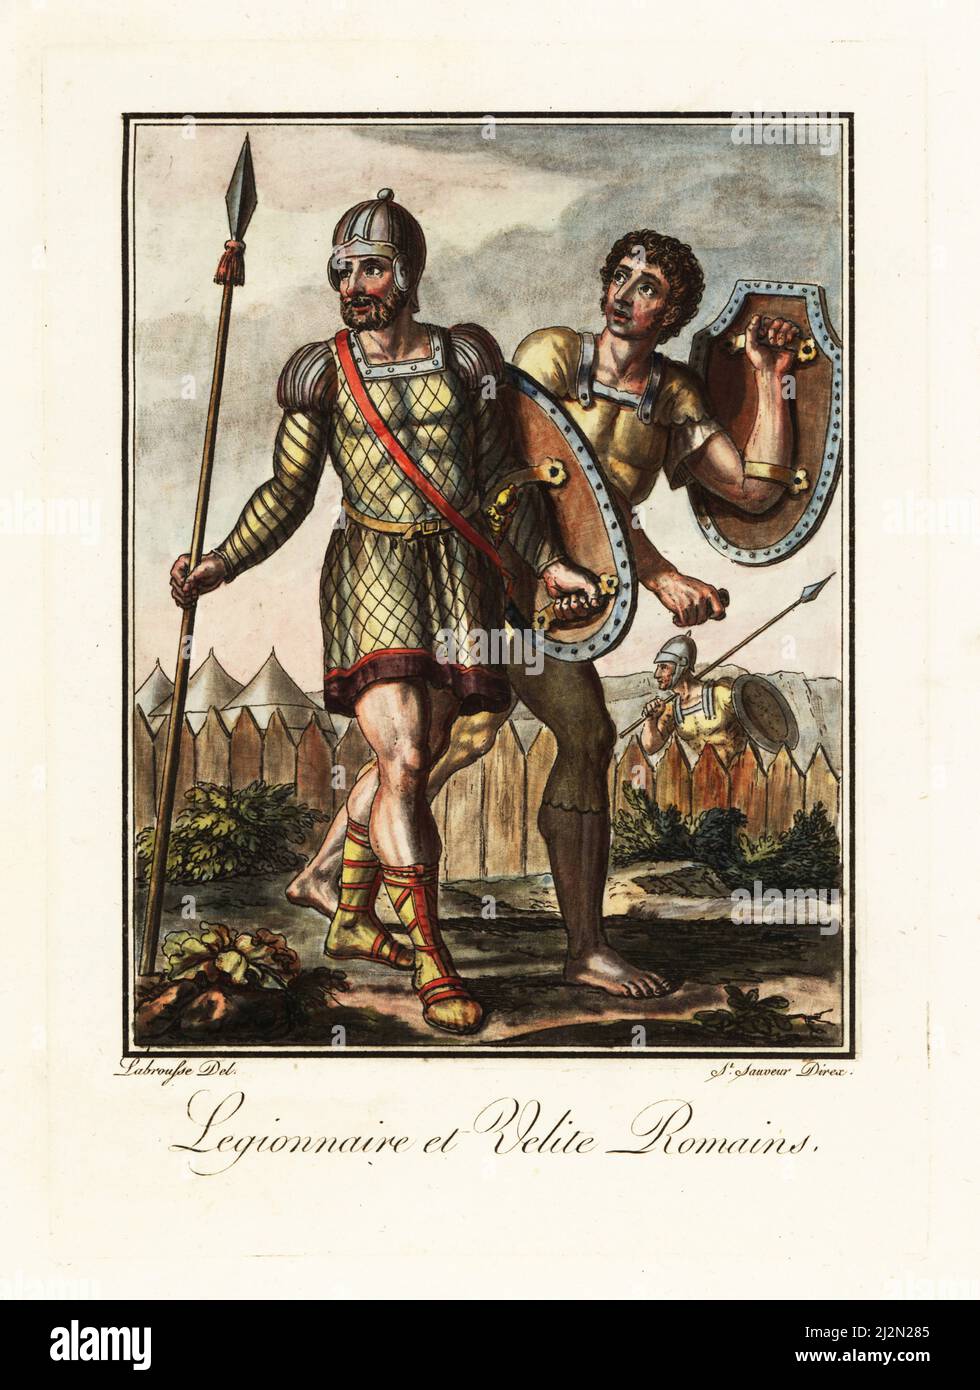 Roman legionary and veles, ancient Rome. The soldier in galea helmet, tunic, caligae hobnail sandals, armed with pilum or javelin and oval shield. Skirmisher in tunic, sagulum gregale or short trousers, barefoot with shield. Legionnaire et Velite Romains. Handcoloured copperplate drawn and engraved by L. Labrousse, artist of Bordeaux, under the direction of Jacques Grasset de Saint-Sauveur from his L’antique Rome, ou description historique et pittoresque, Ancient Rome, or historical and picturesque description, Chez Deroy, Paris, 1796. Stock Photo